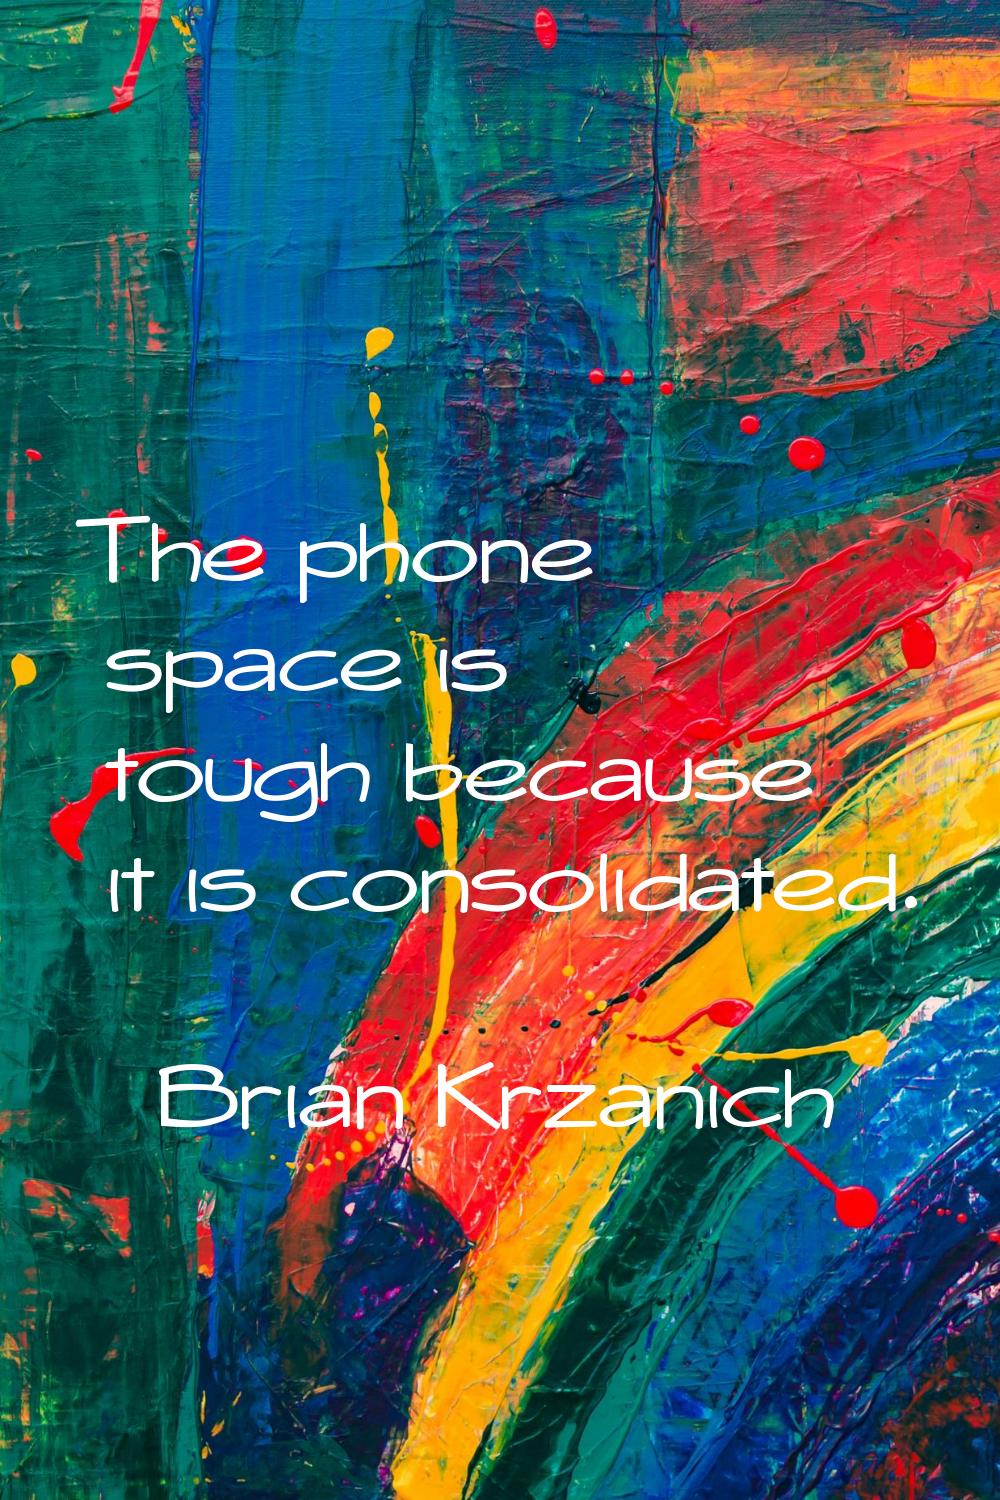 The phone space is tough because it is consolidated.